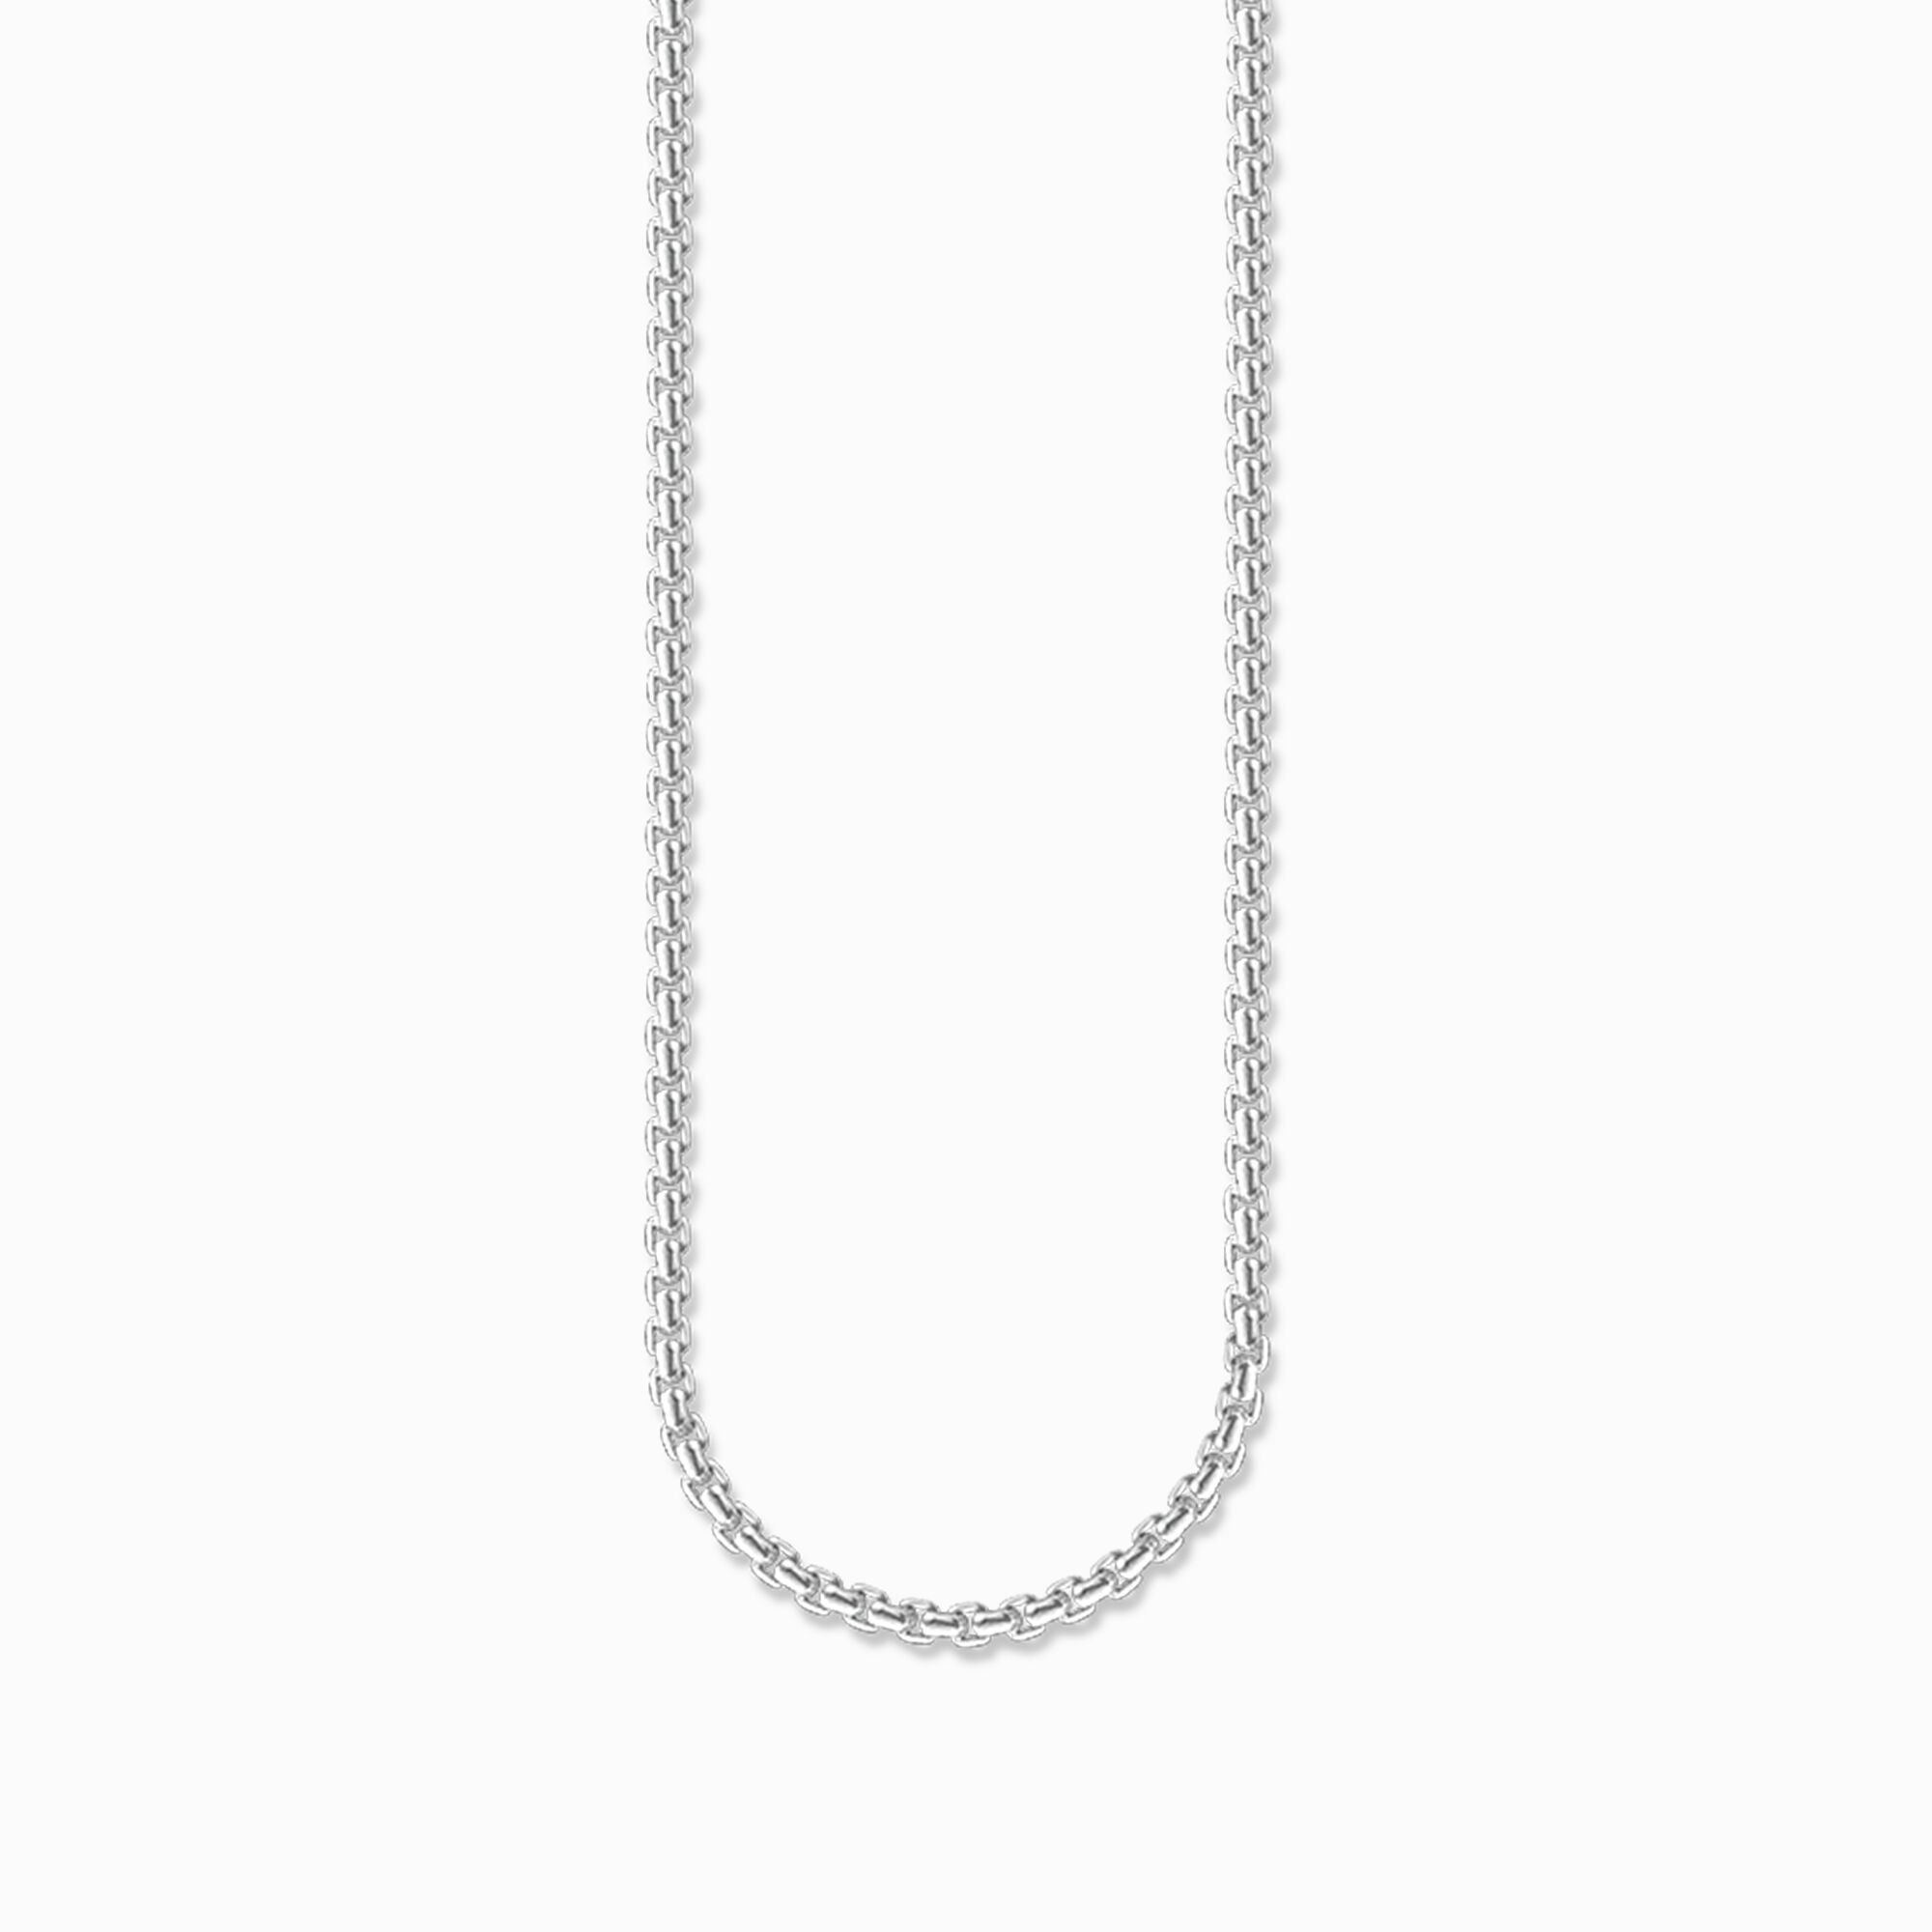 Venezia chain from the  collection in the THOMAS SABO online store